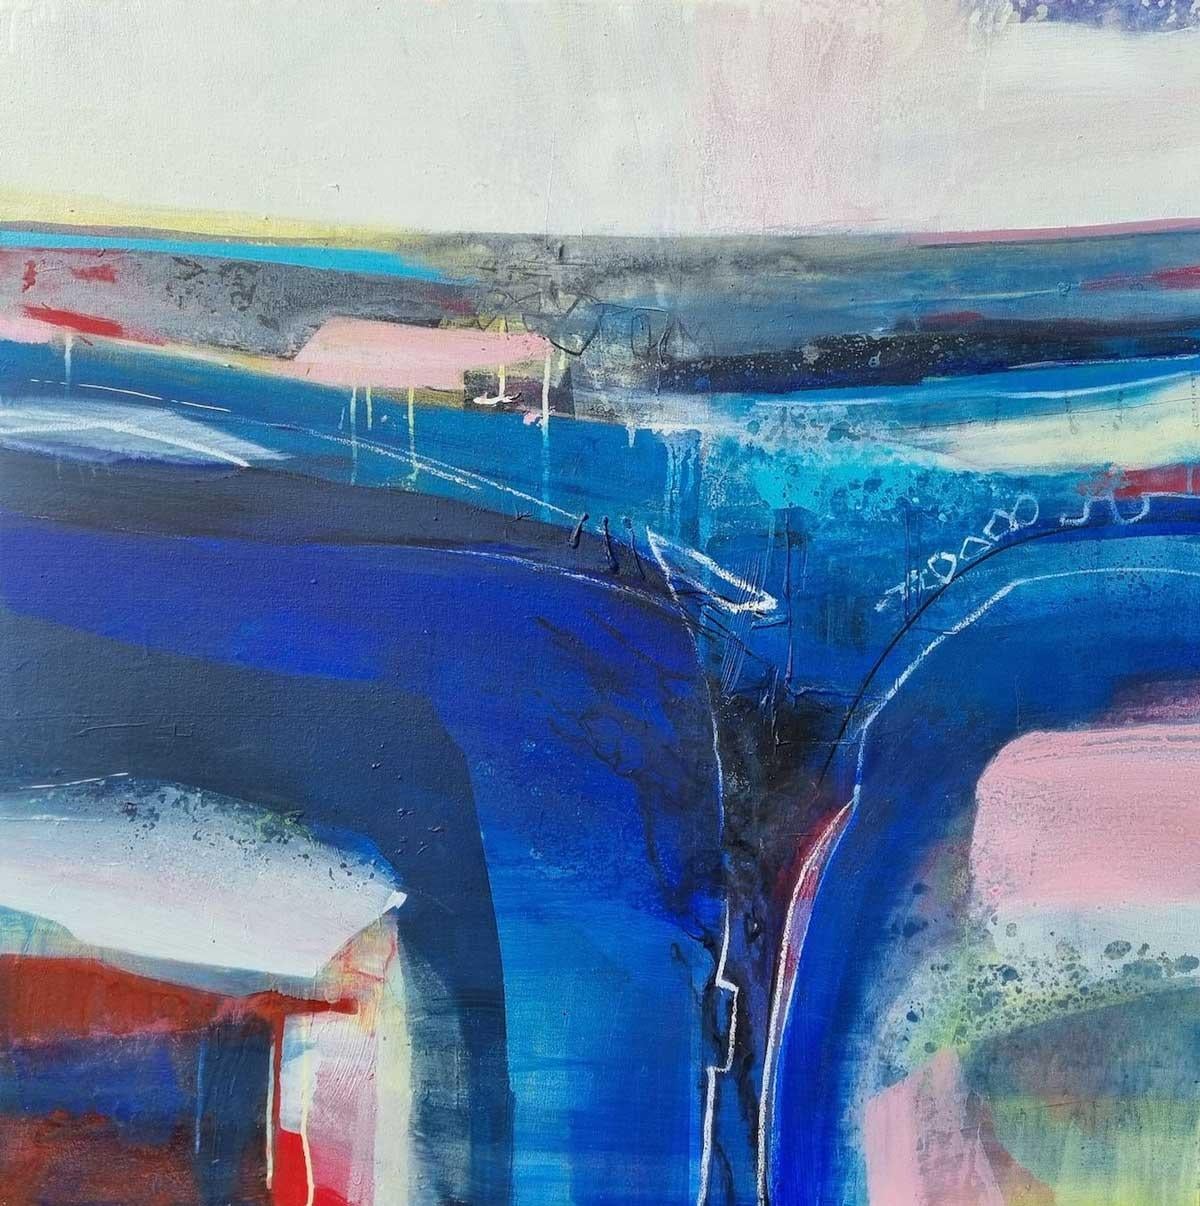 Arcadia - Colourful Abstract Landscape: Framed Mixed Media on Canvas